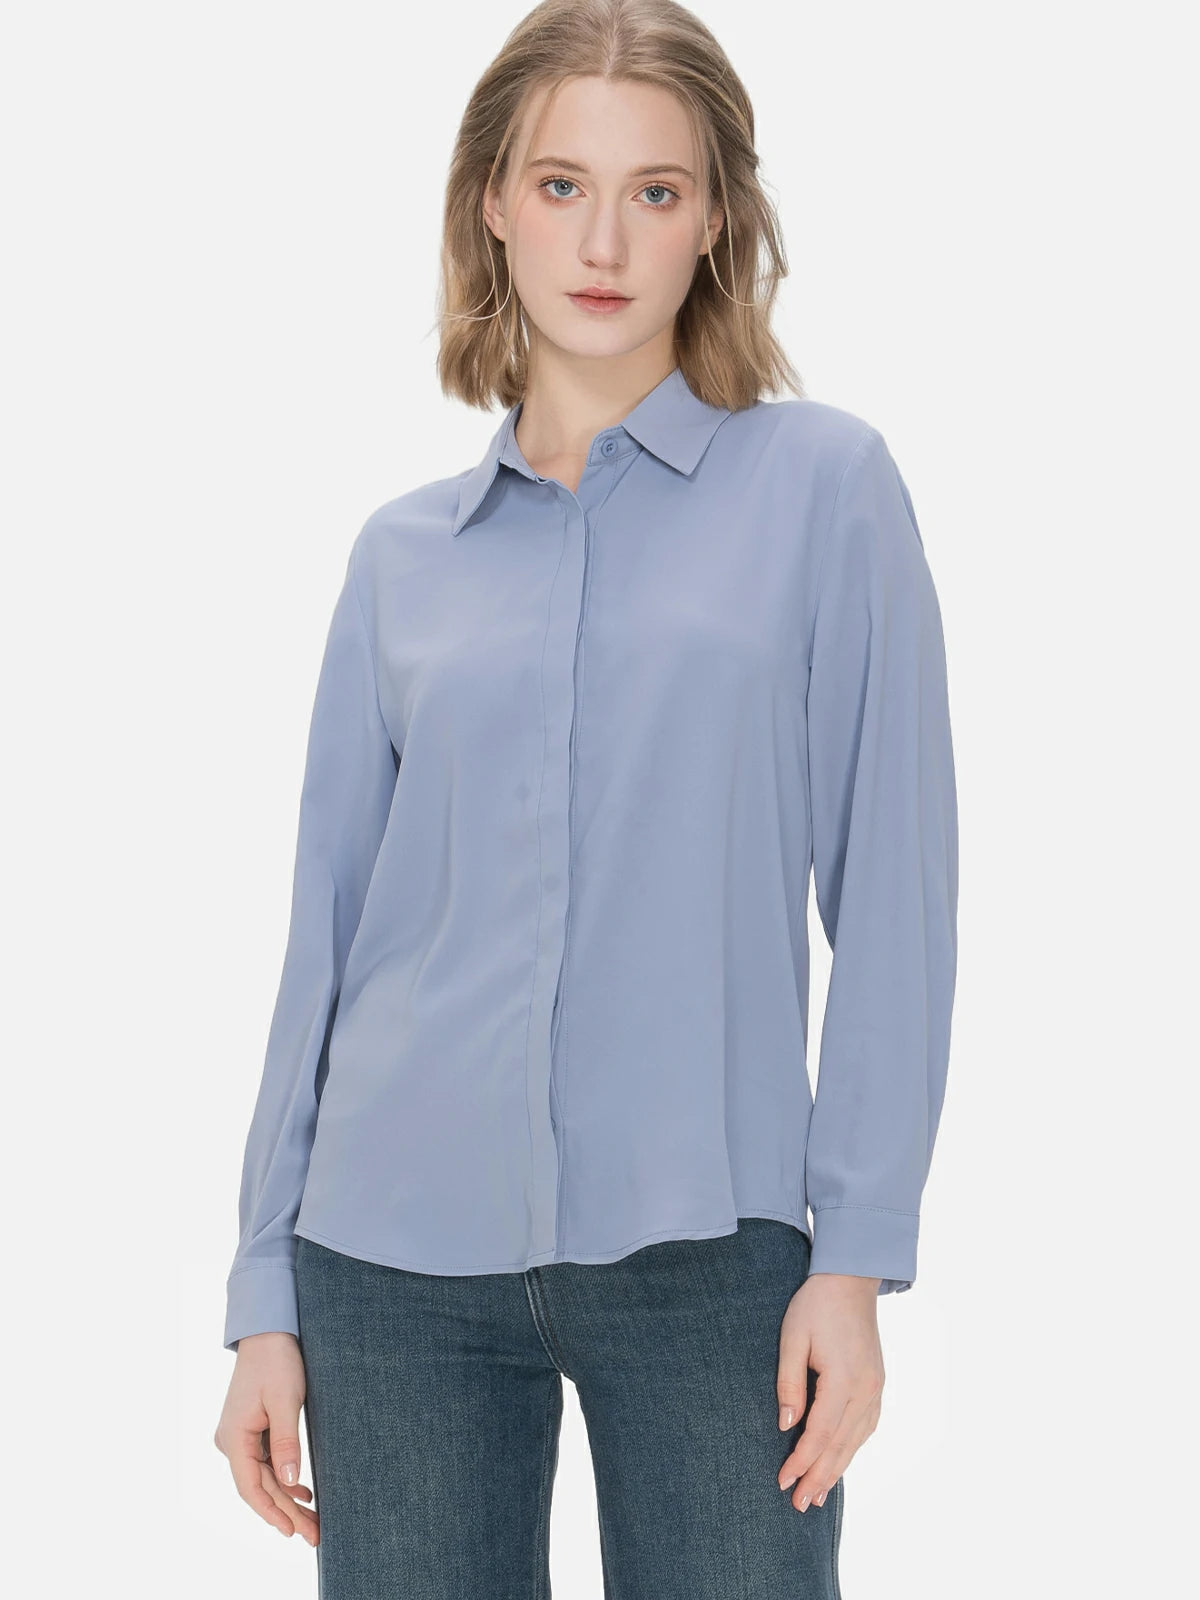 Elegant blue chiffon shirt with a turnover collar, presenting a feminine and graceful ambiance, suitable for versatile styling in both casual and formal settings.